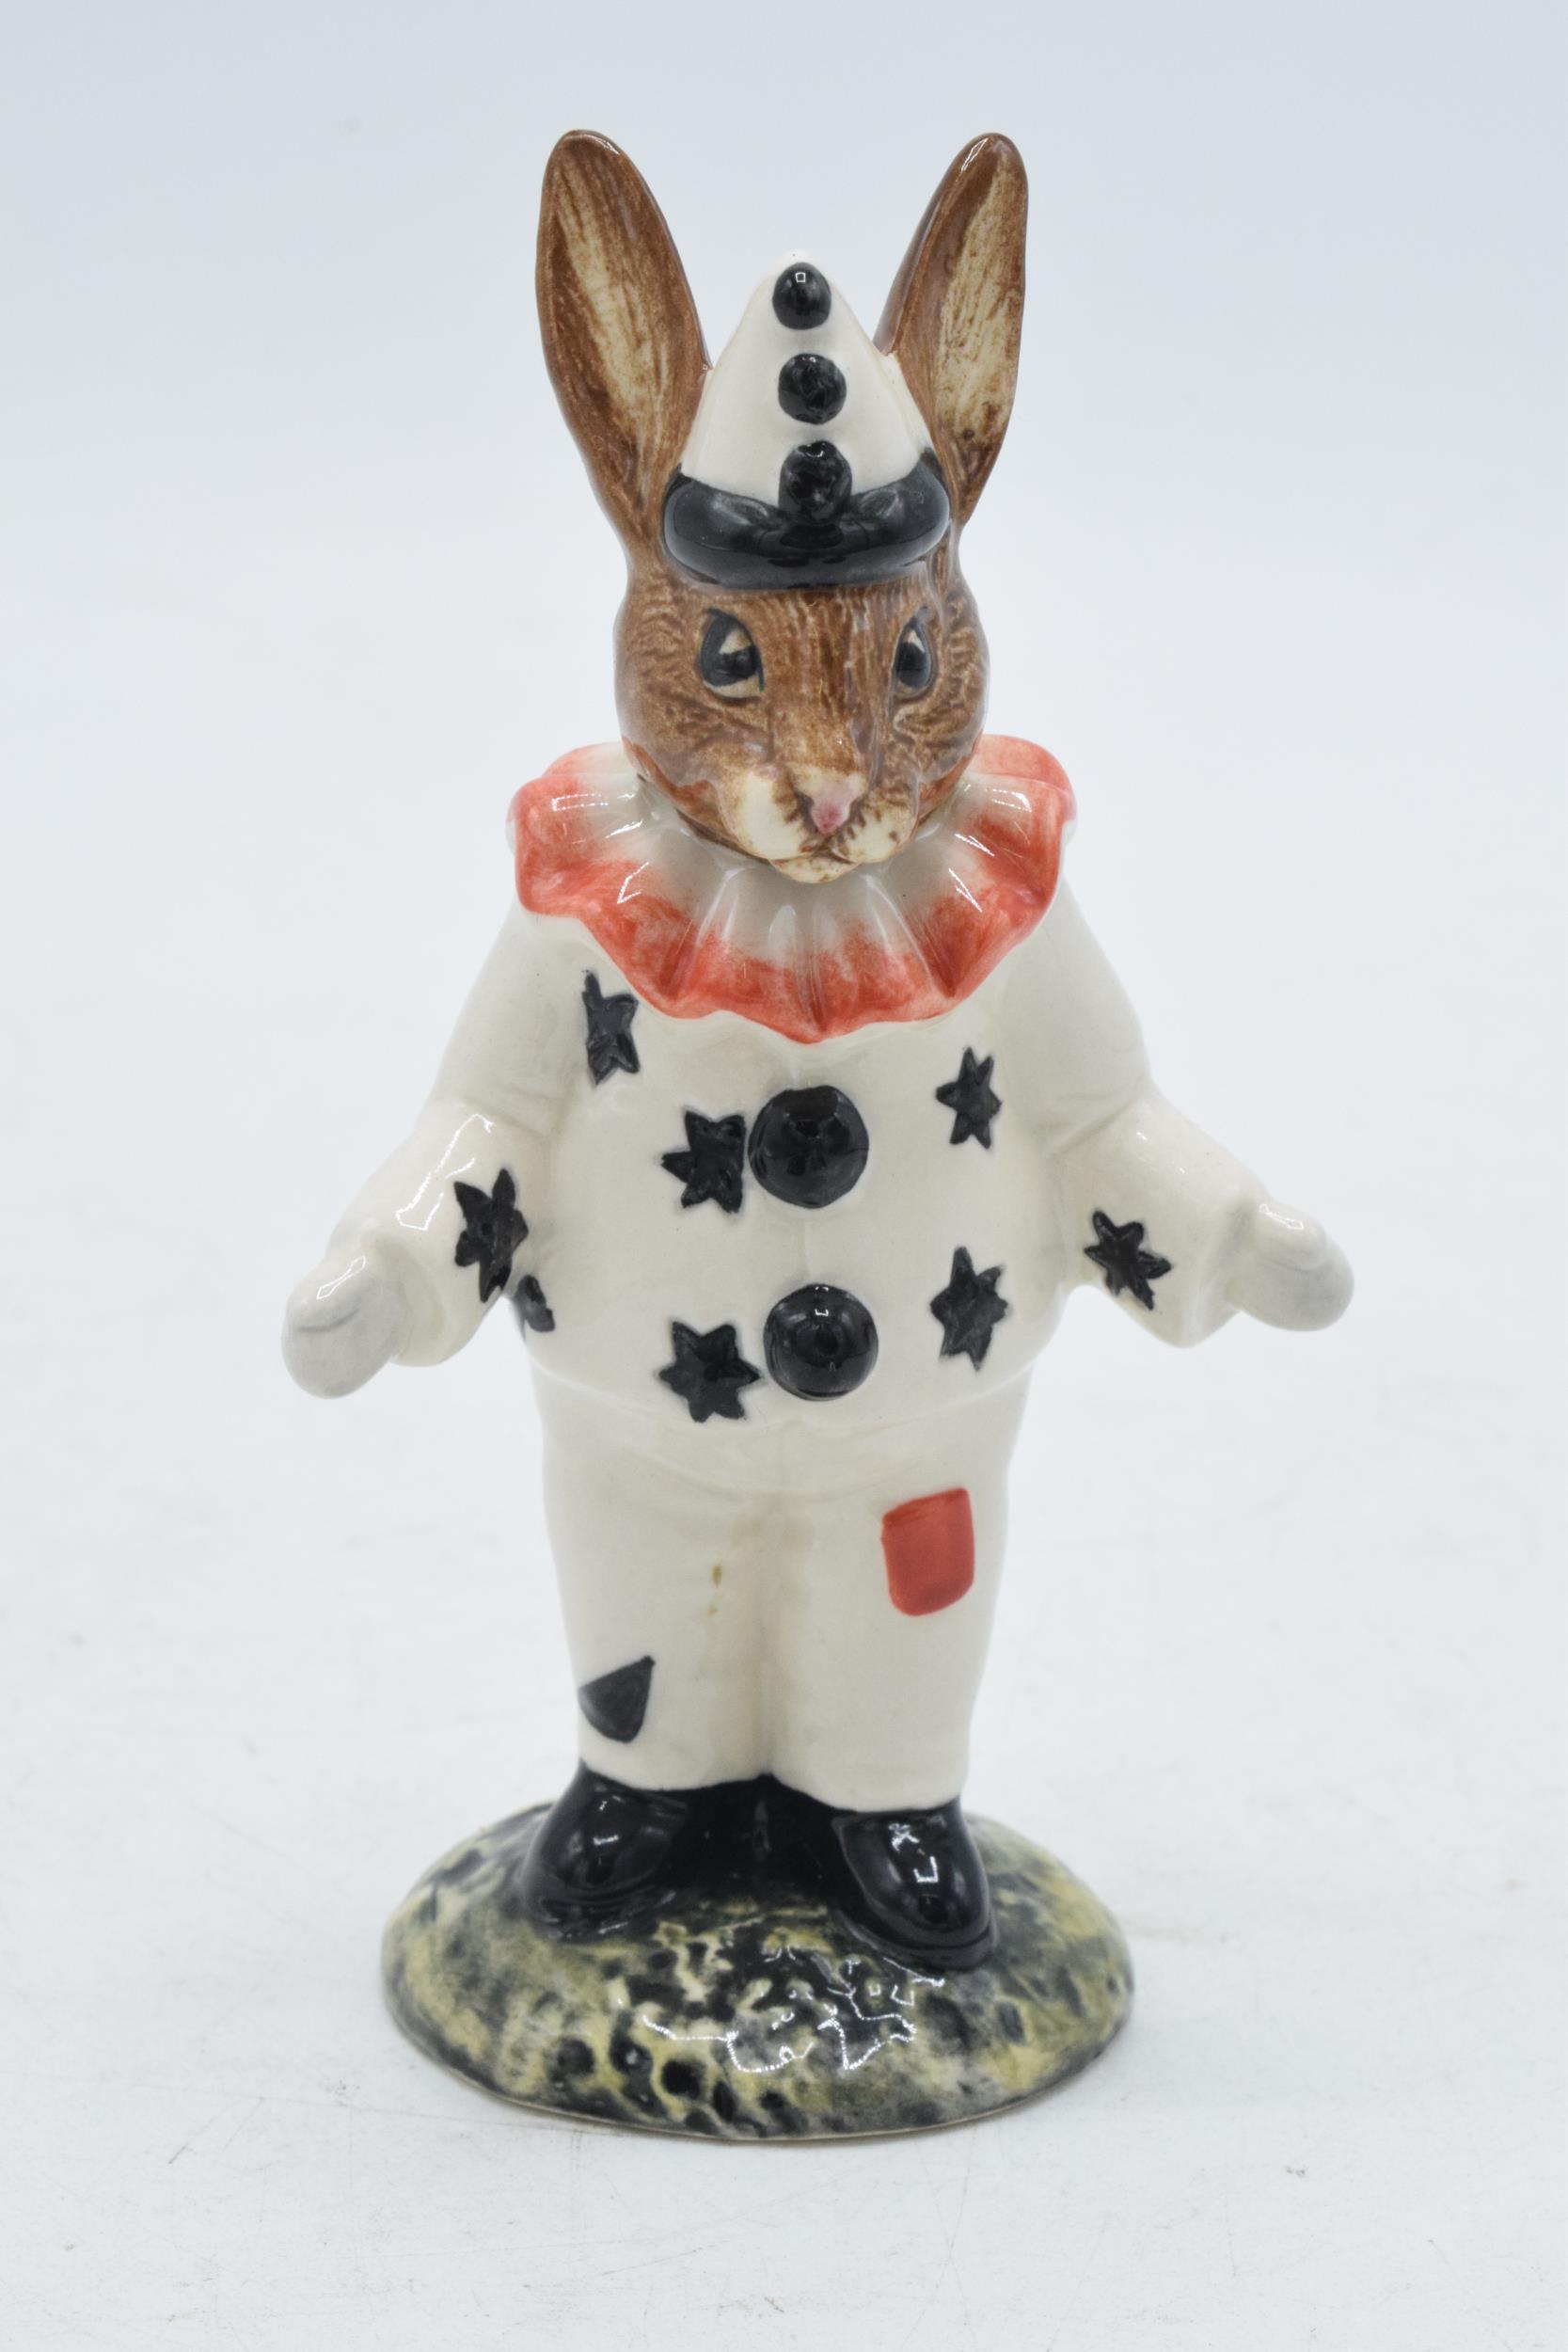 Royal Doulton Clown Bunnykins DB128 limited edition 750. In good condition with no obvious damage or - Image 2 of 4